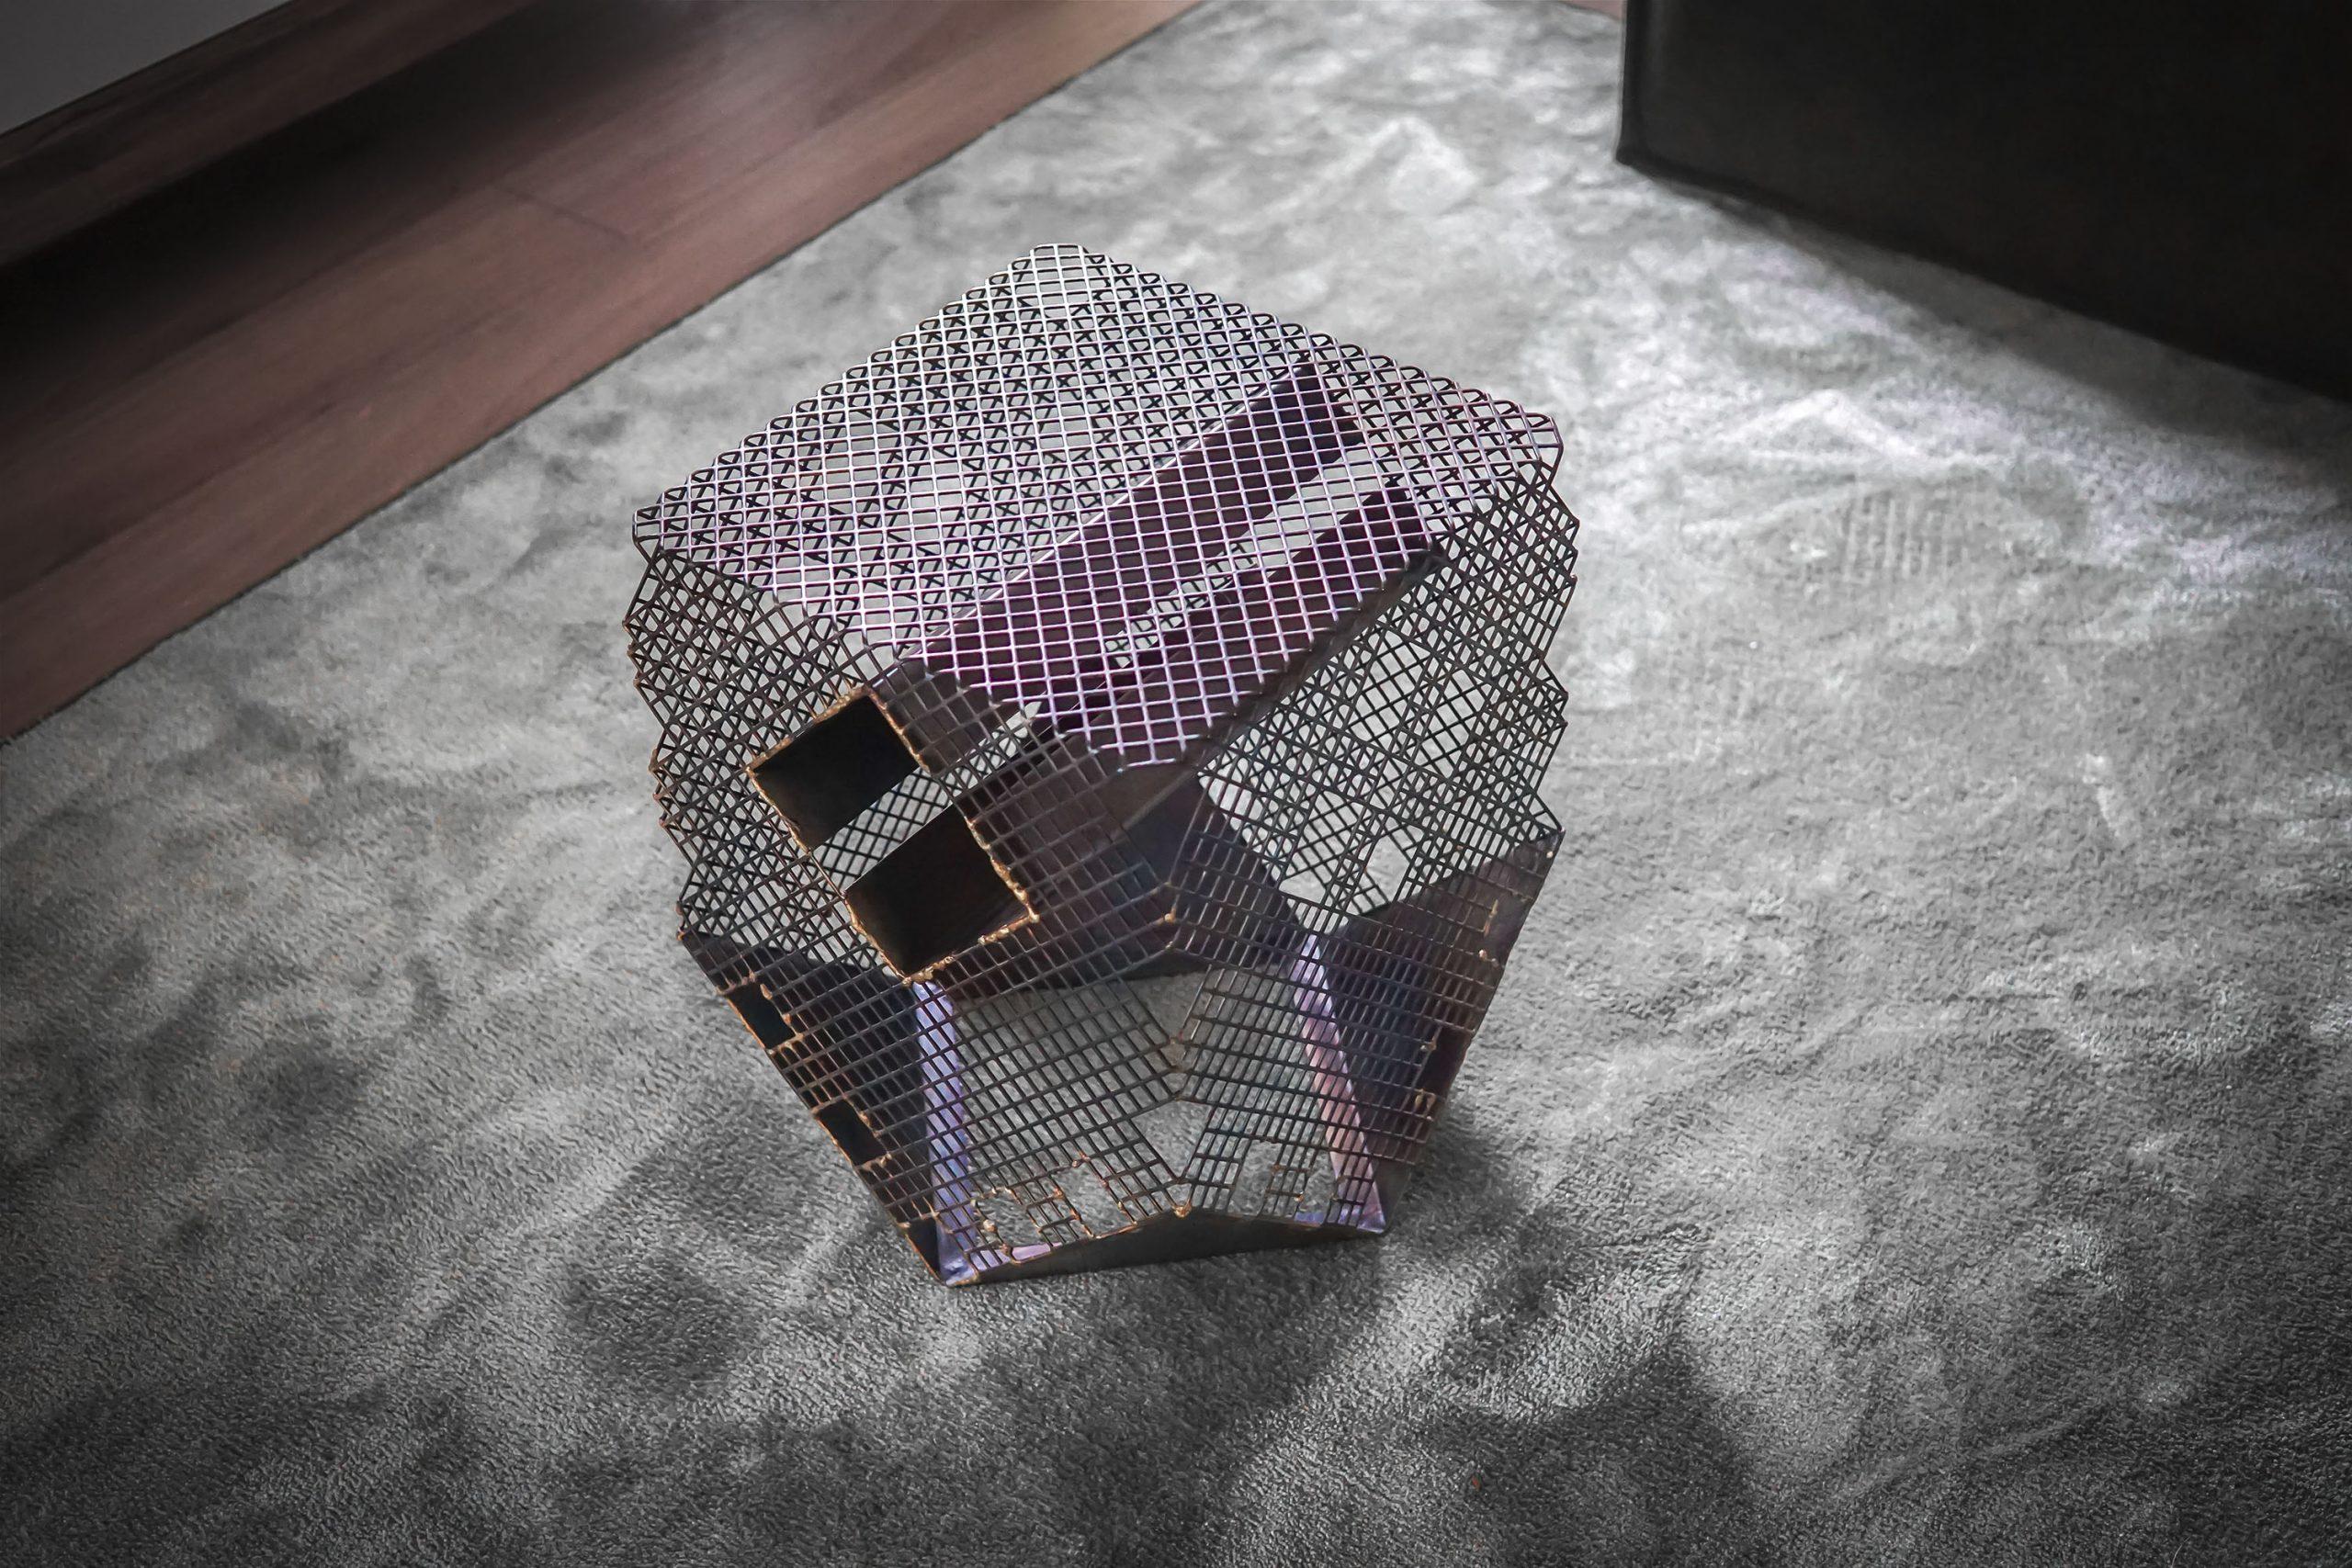 Dragon  Sculptural Side Table / Stool made out of perforated sheet, designed for collective seating arrangements that challenge social distancing and encourage the exploration of the visual perception of metal, through depth and volumes, different